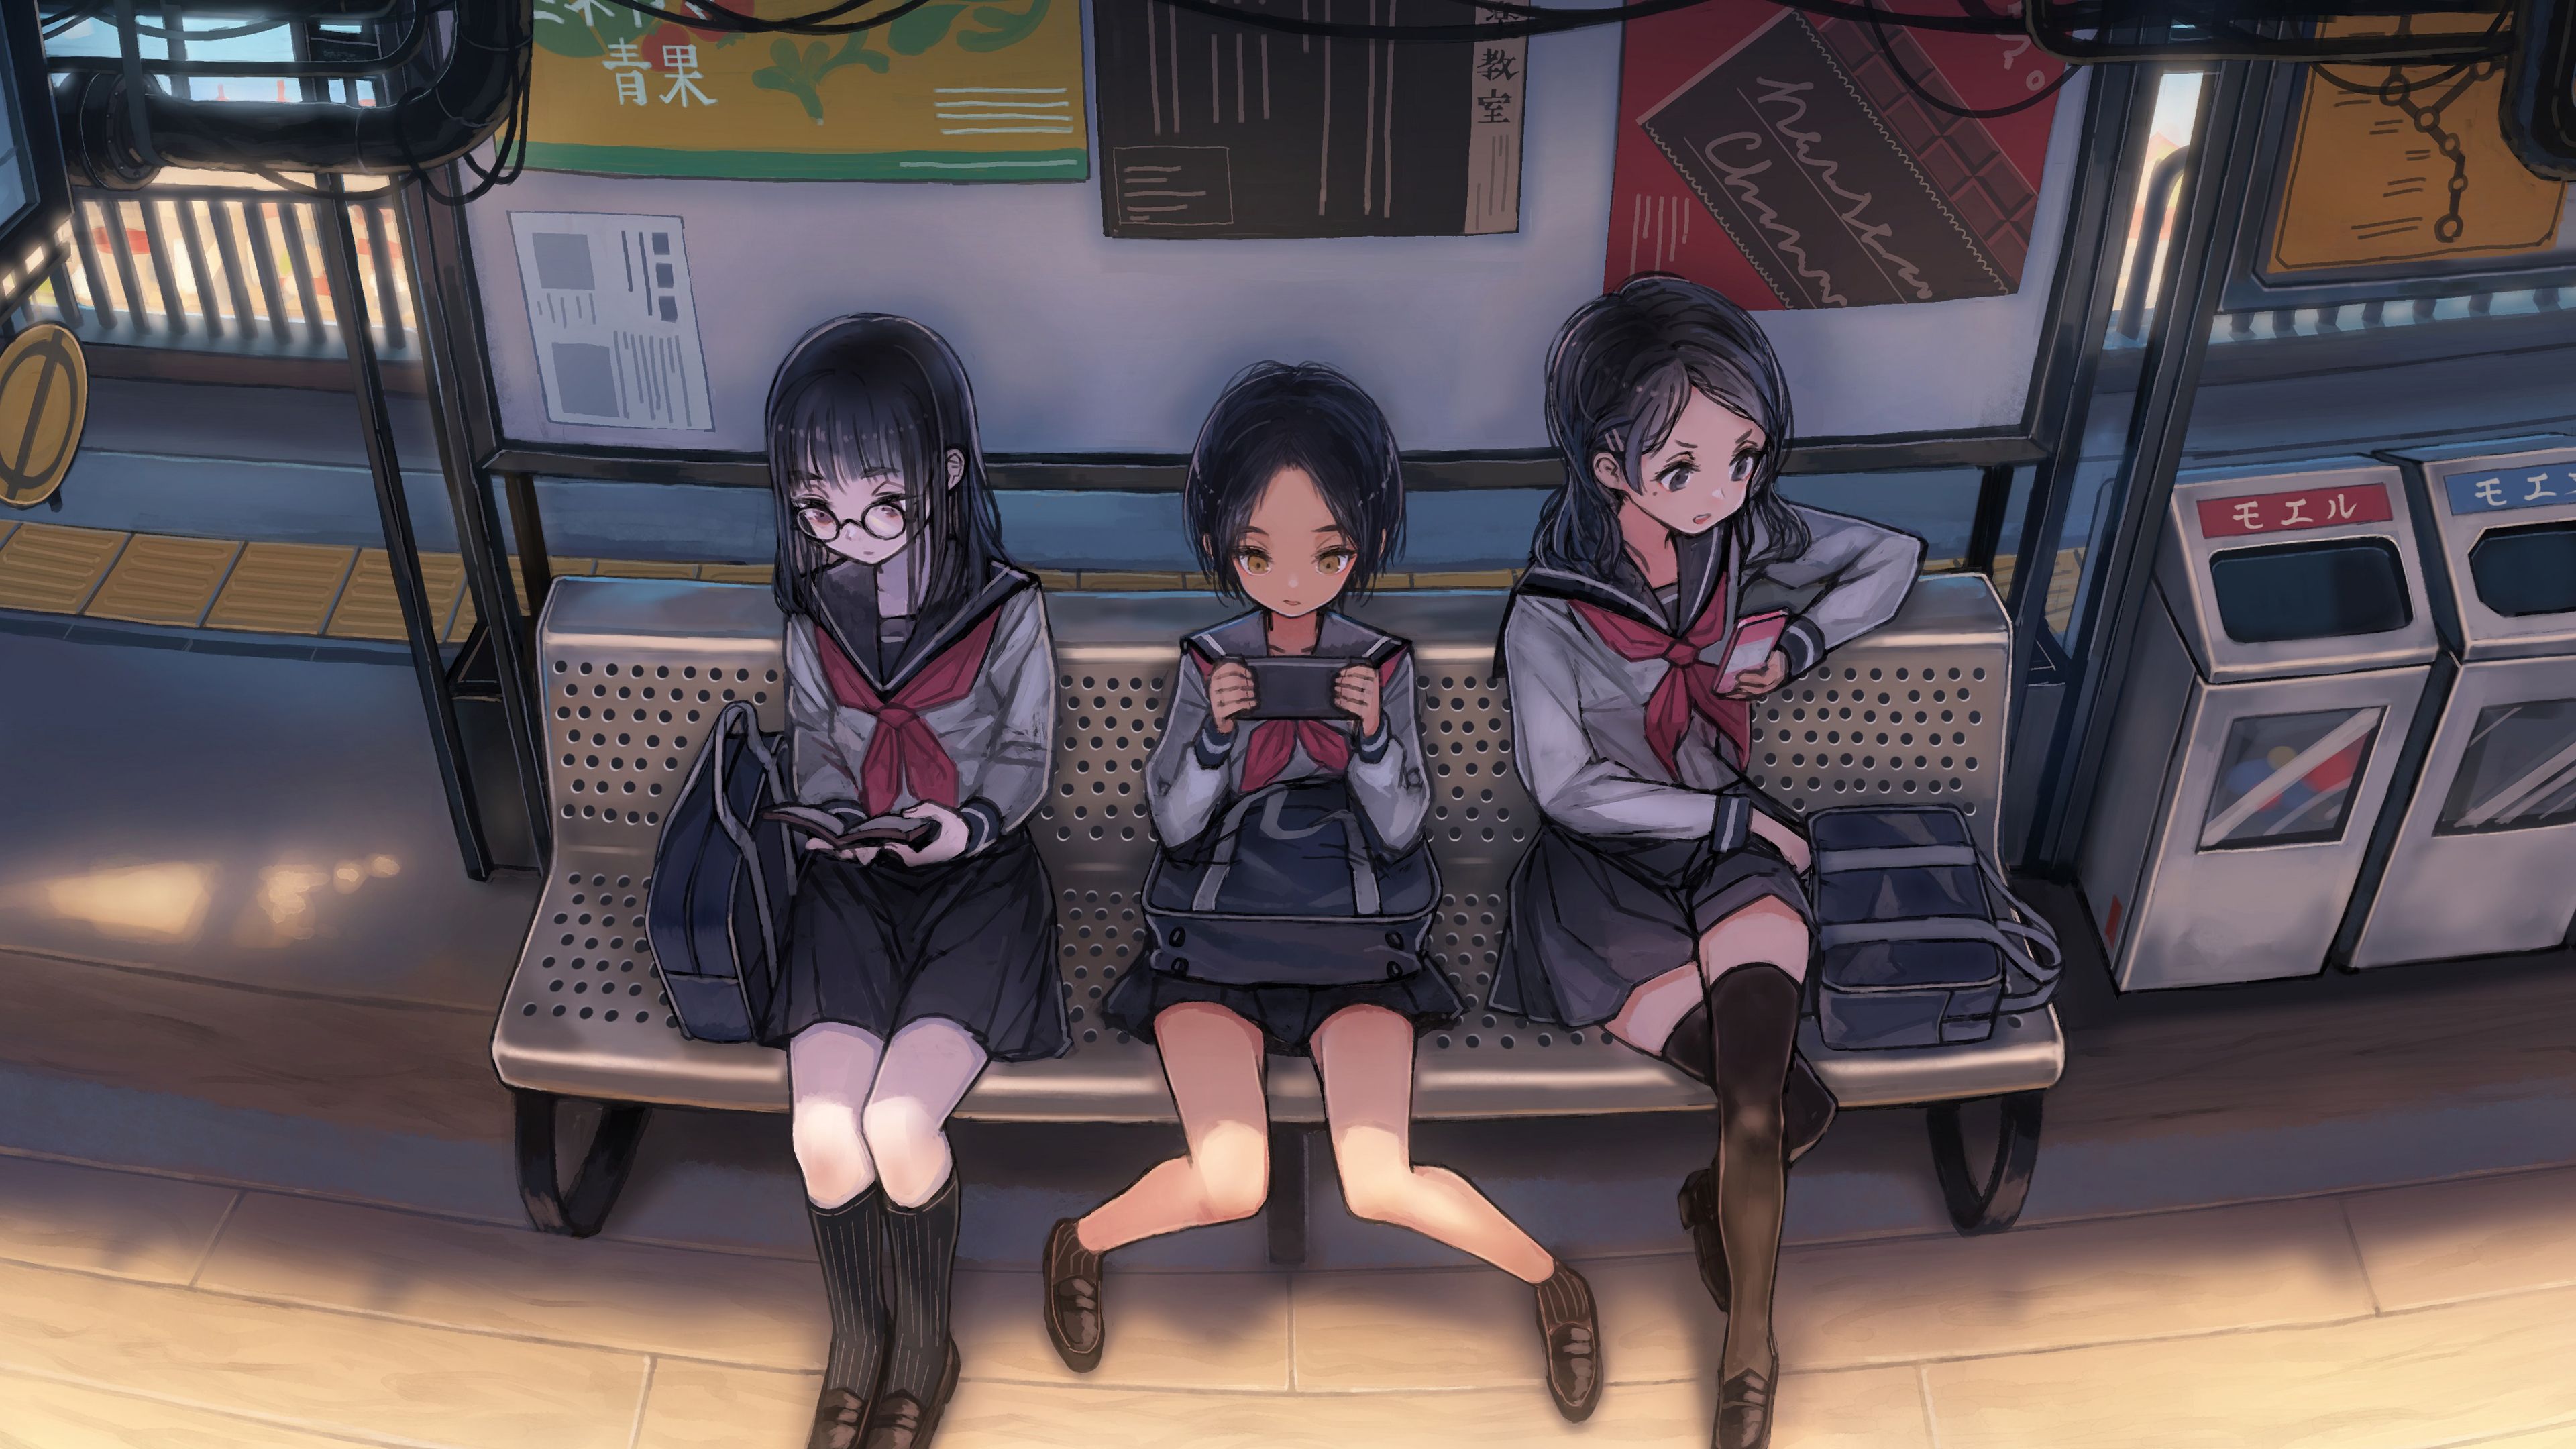 Anime Schoool Girls On Phones Waiting For Bus 4k, HD Anime, 4k Wallpaper, Image, Background, Photo and Picture